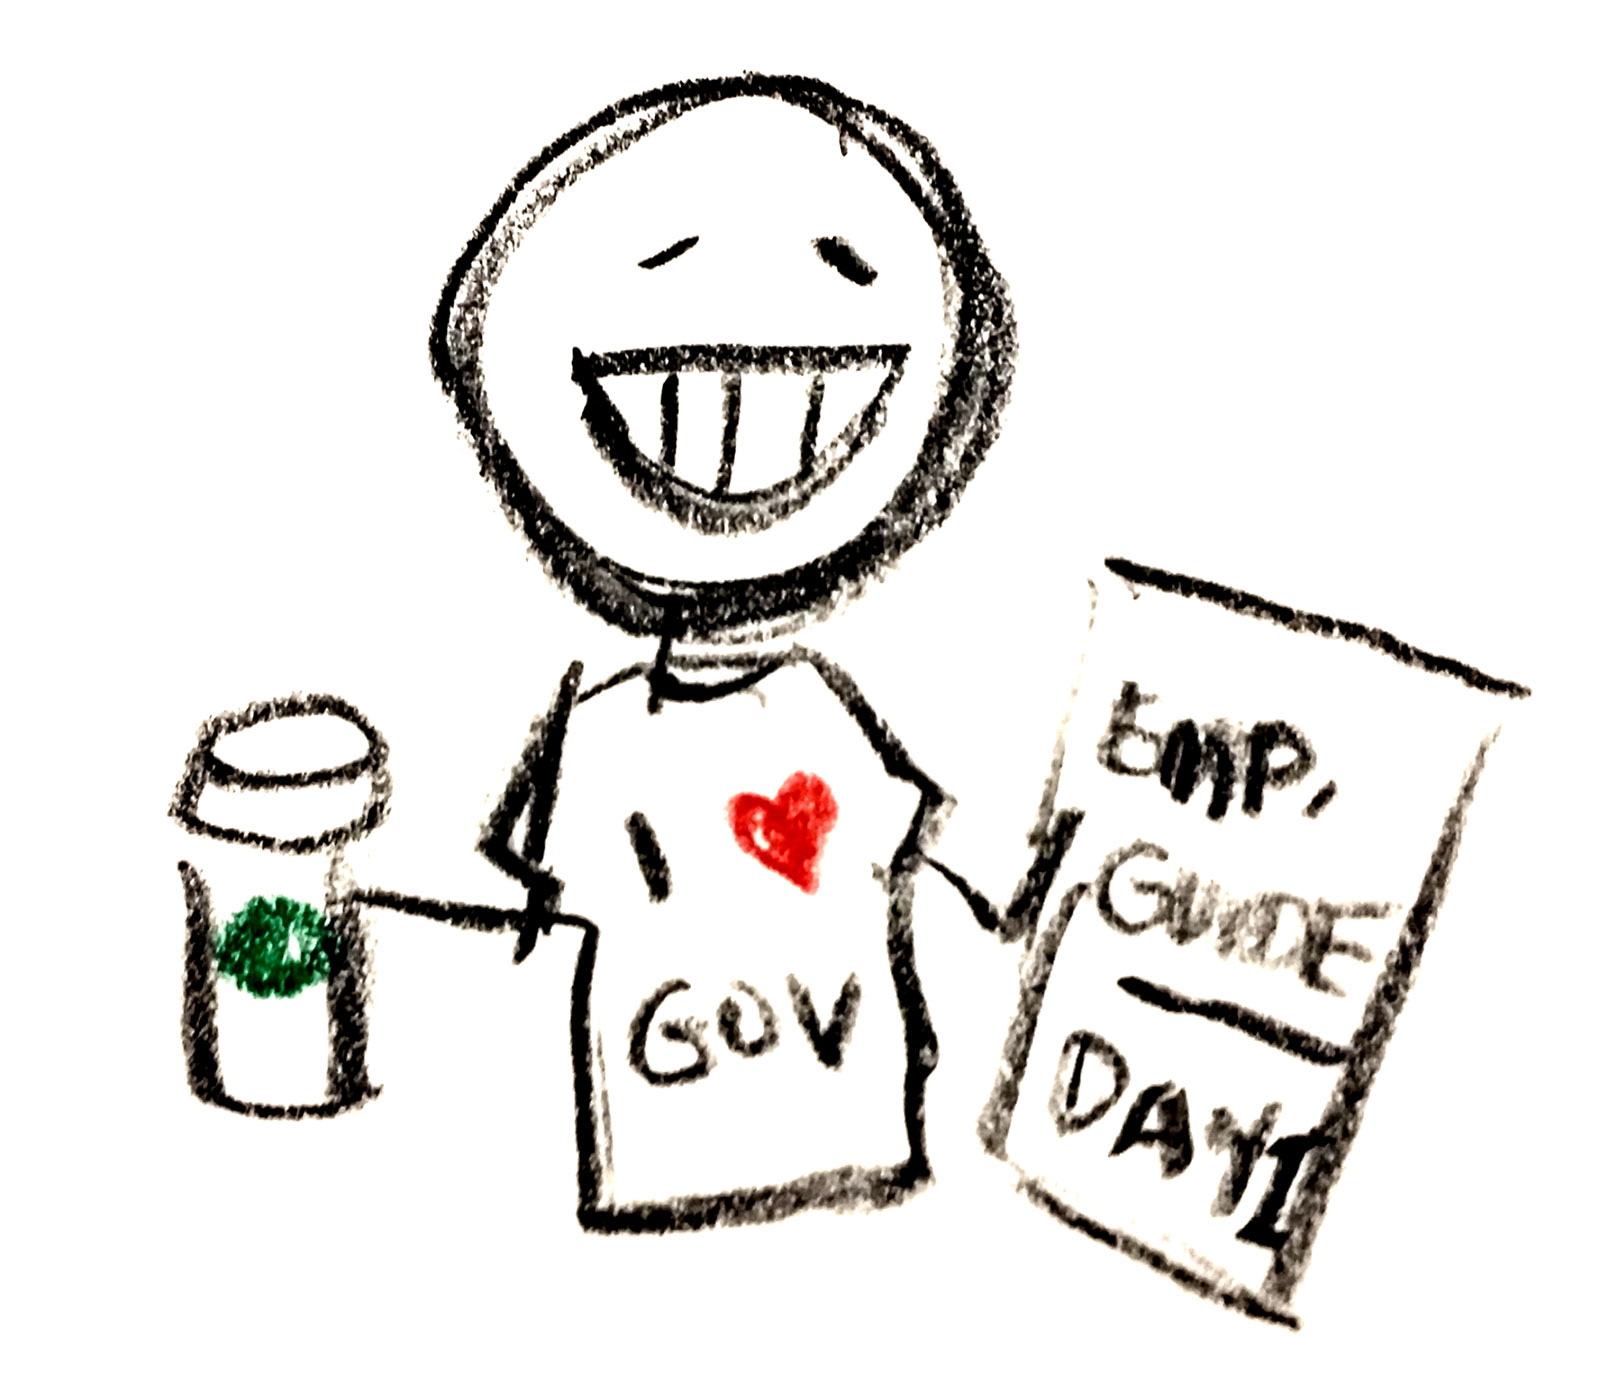 Stick figure of a person with an I heart gov shirt and a coffee cup.